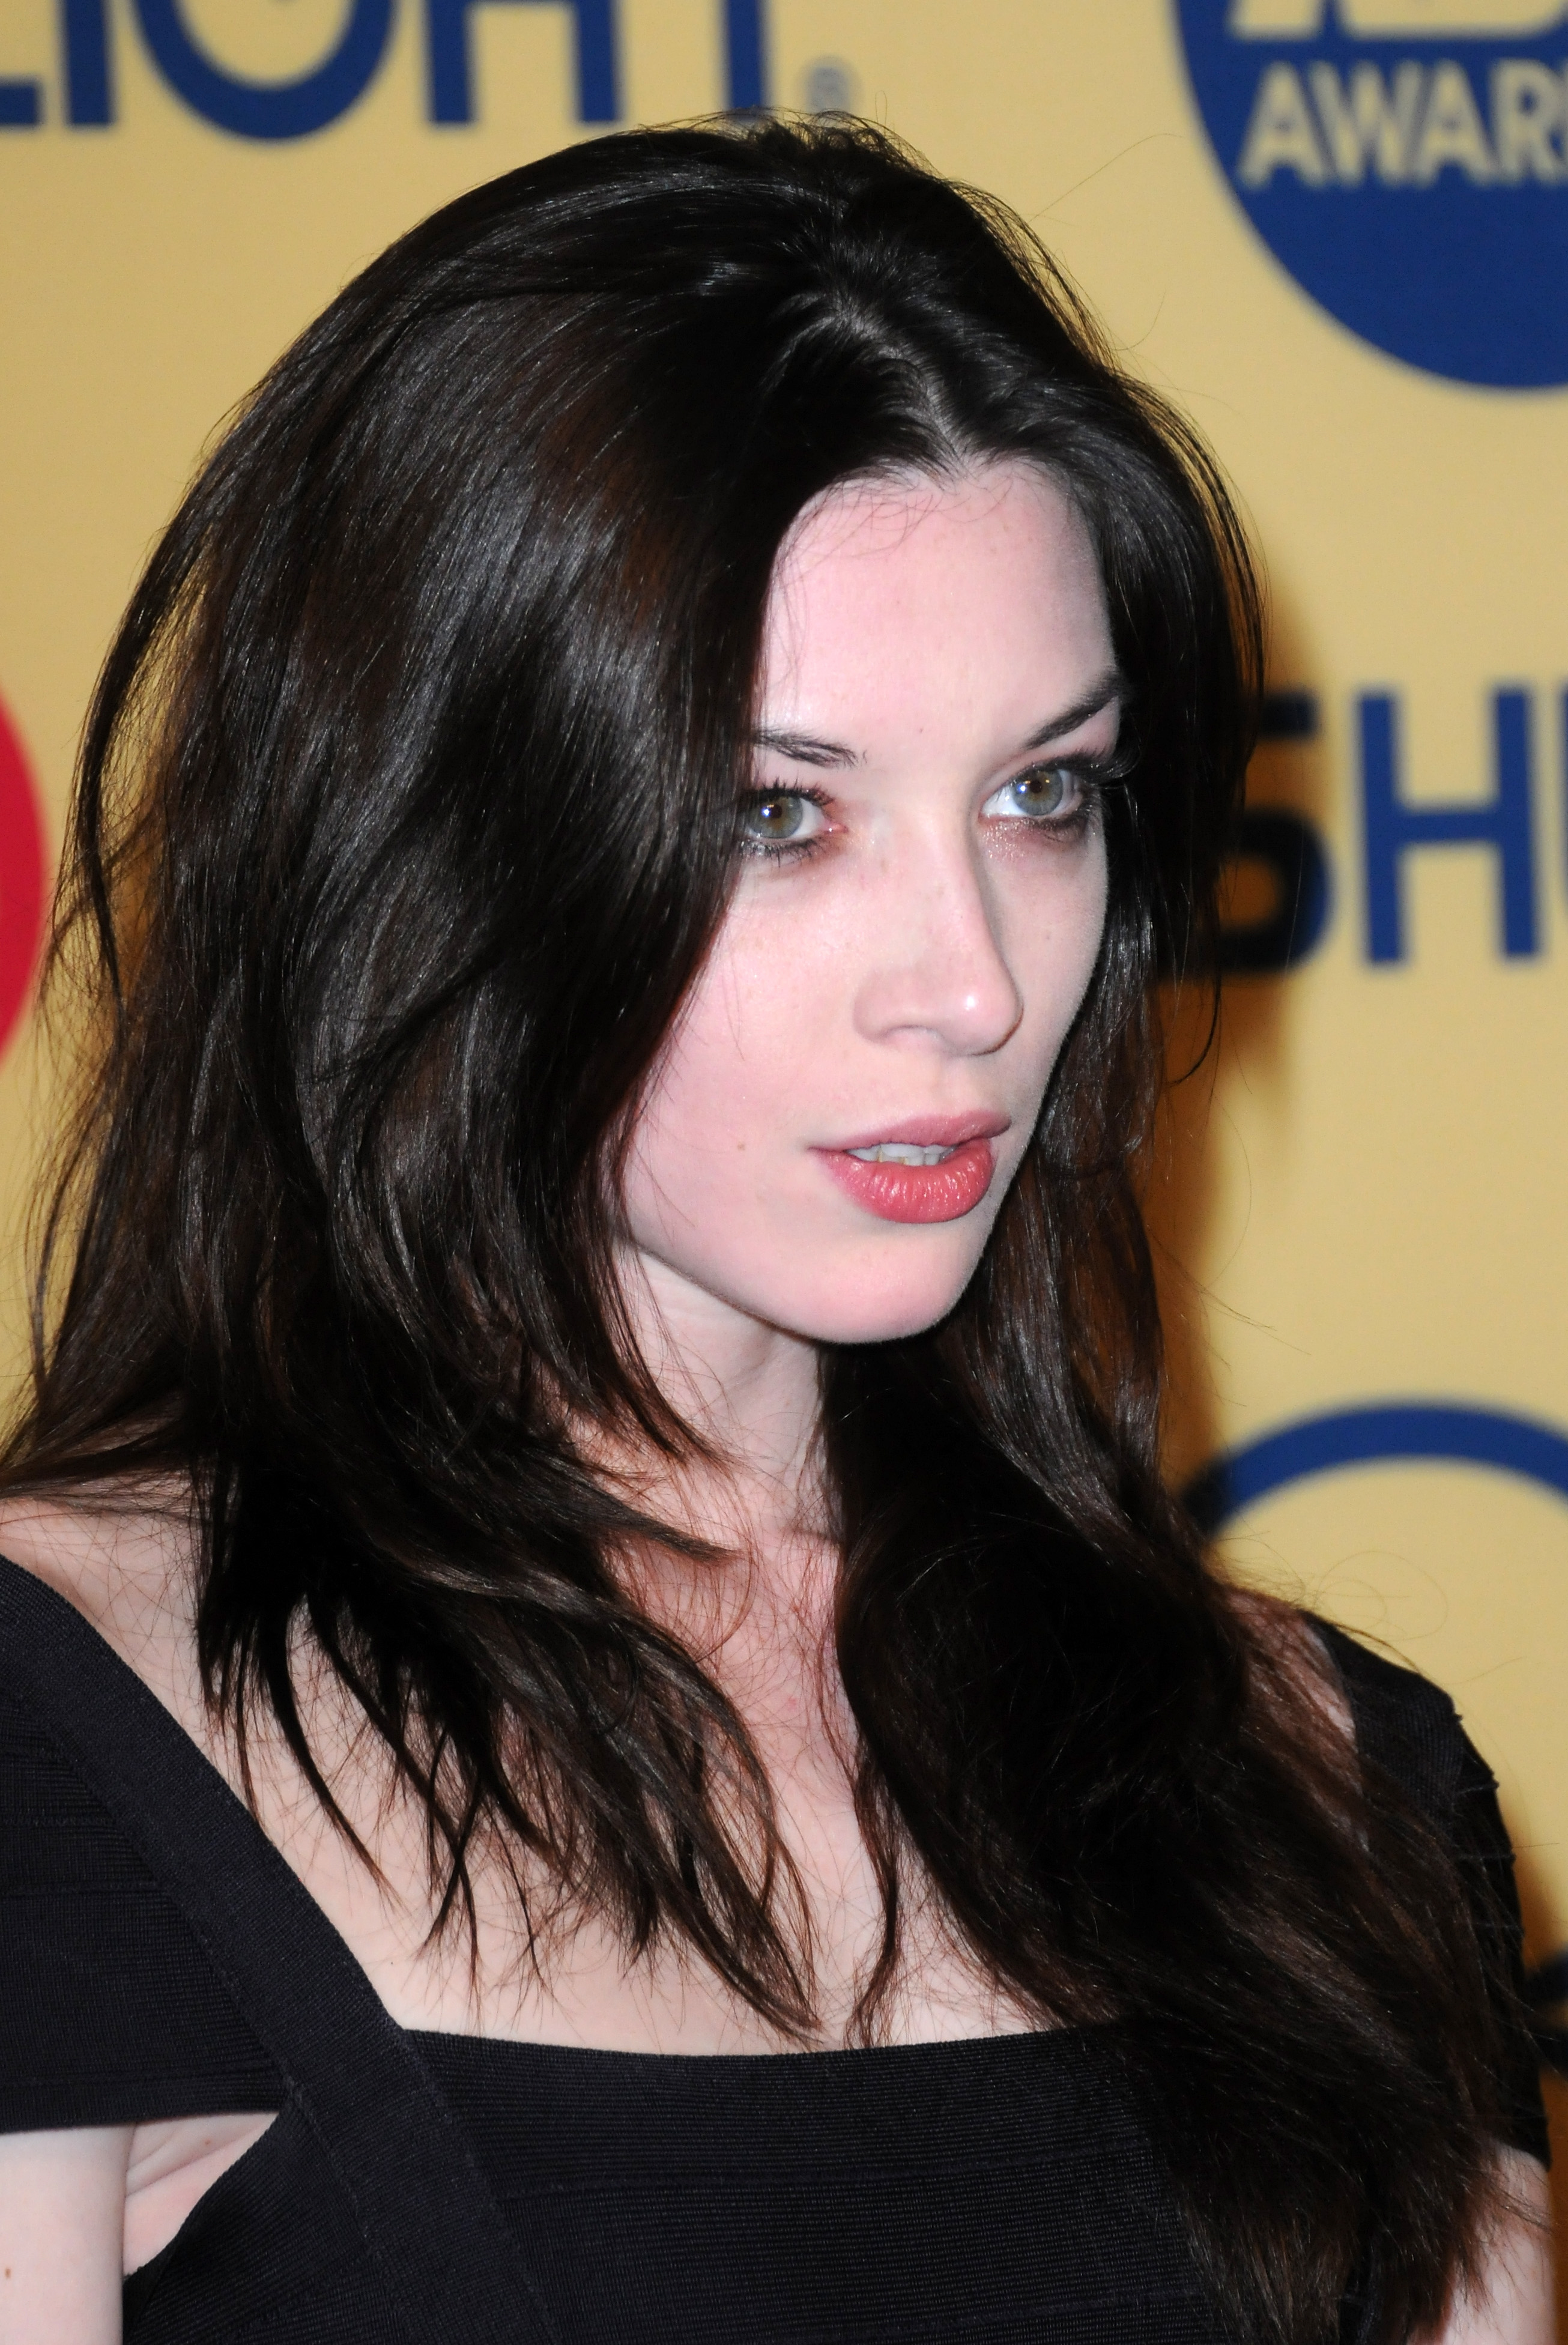 Stoya, James Deen and the New Shift in Rape Culture Time